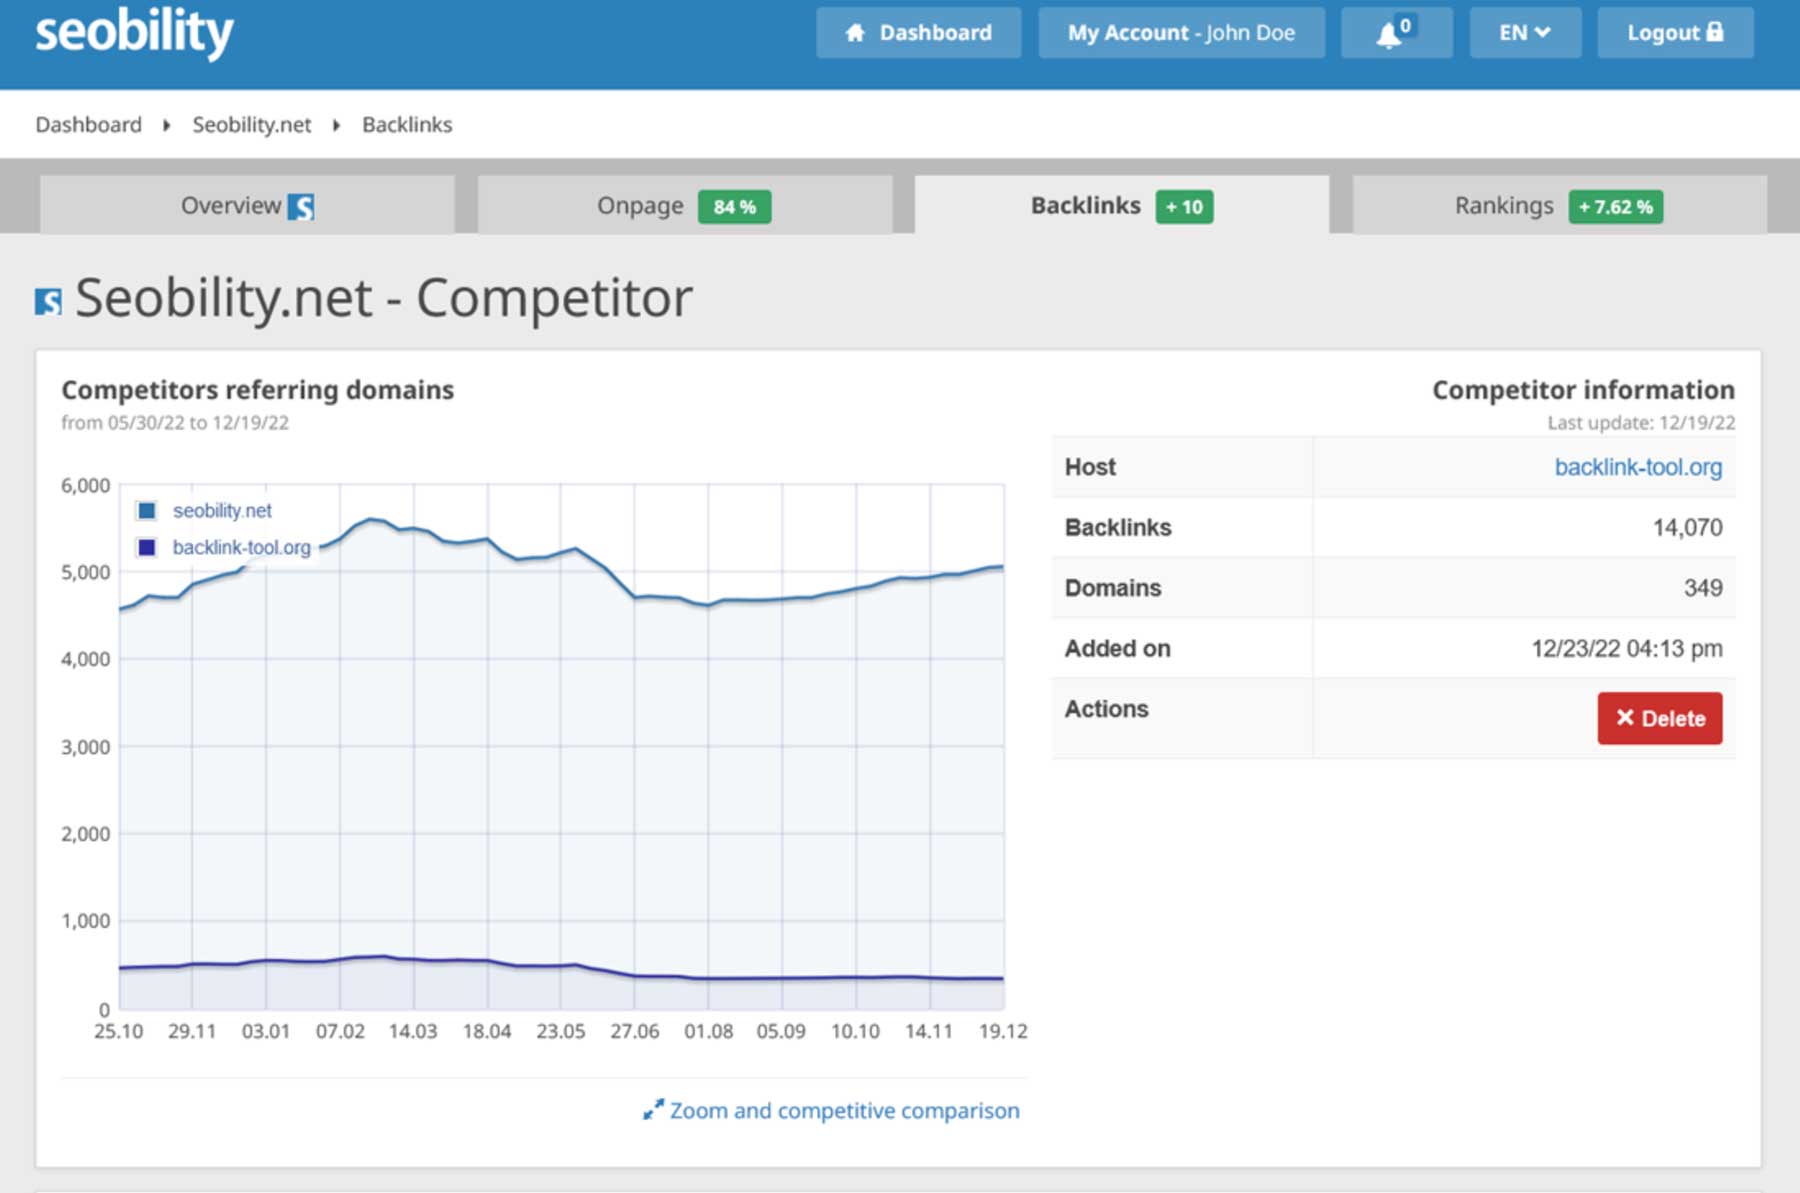 Competitor backlink analysis